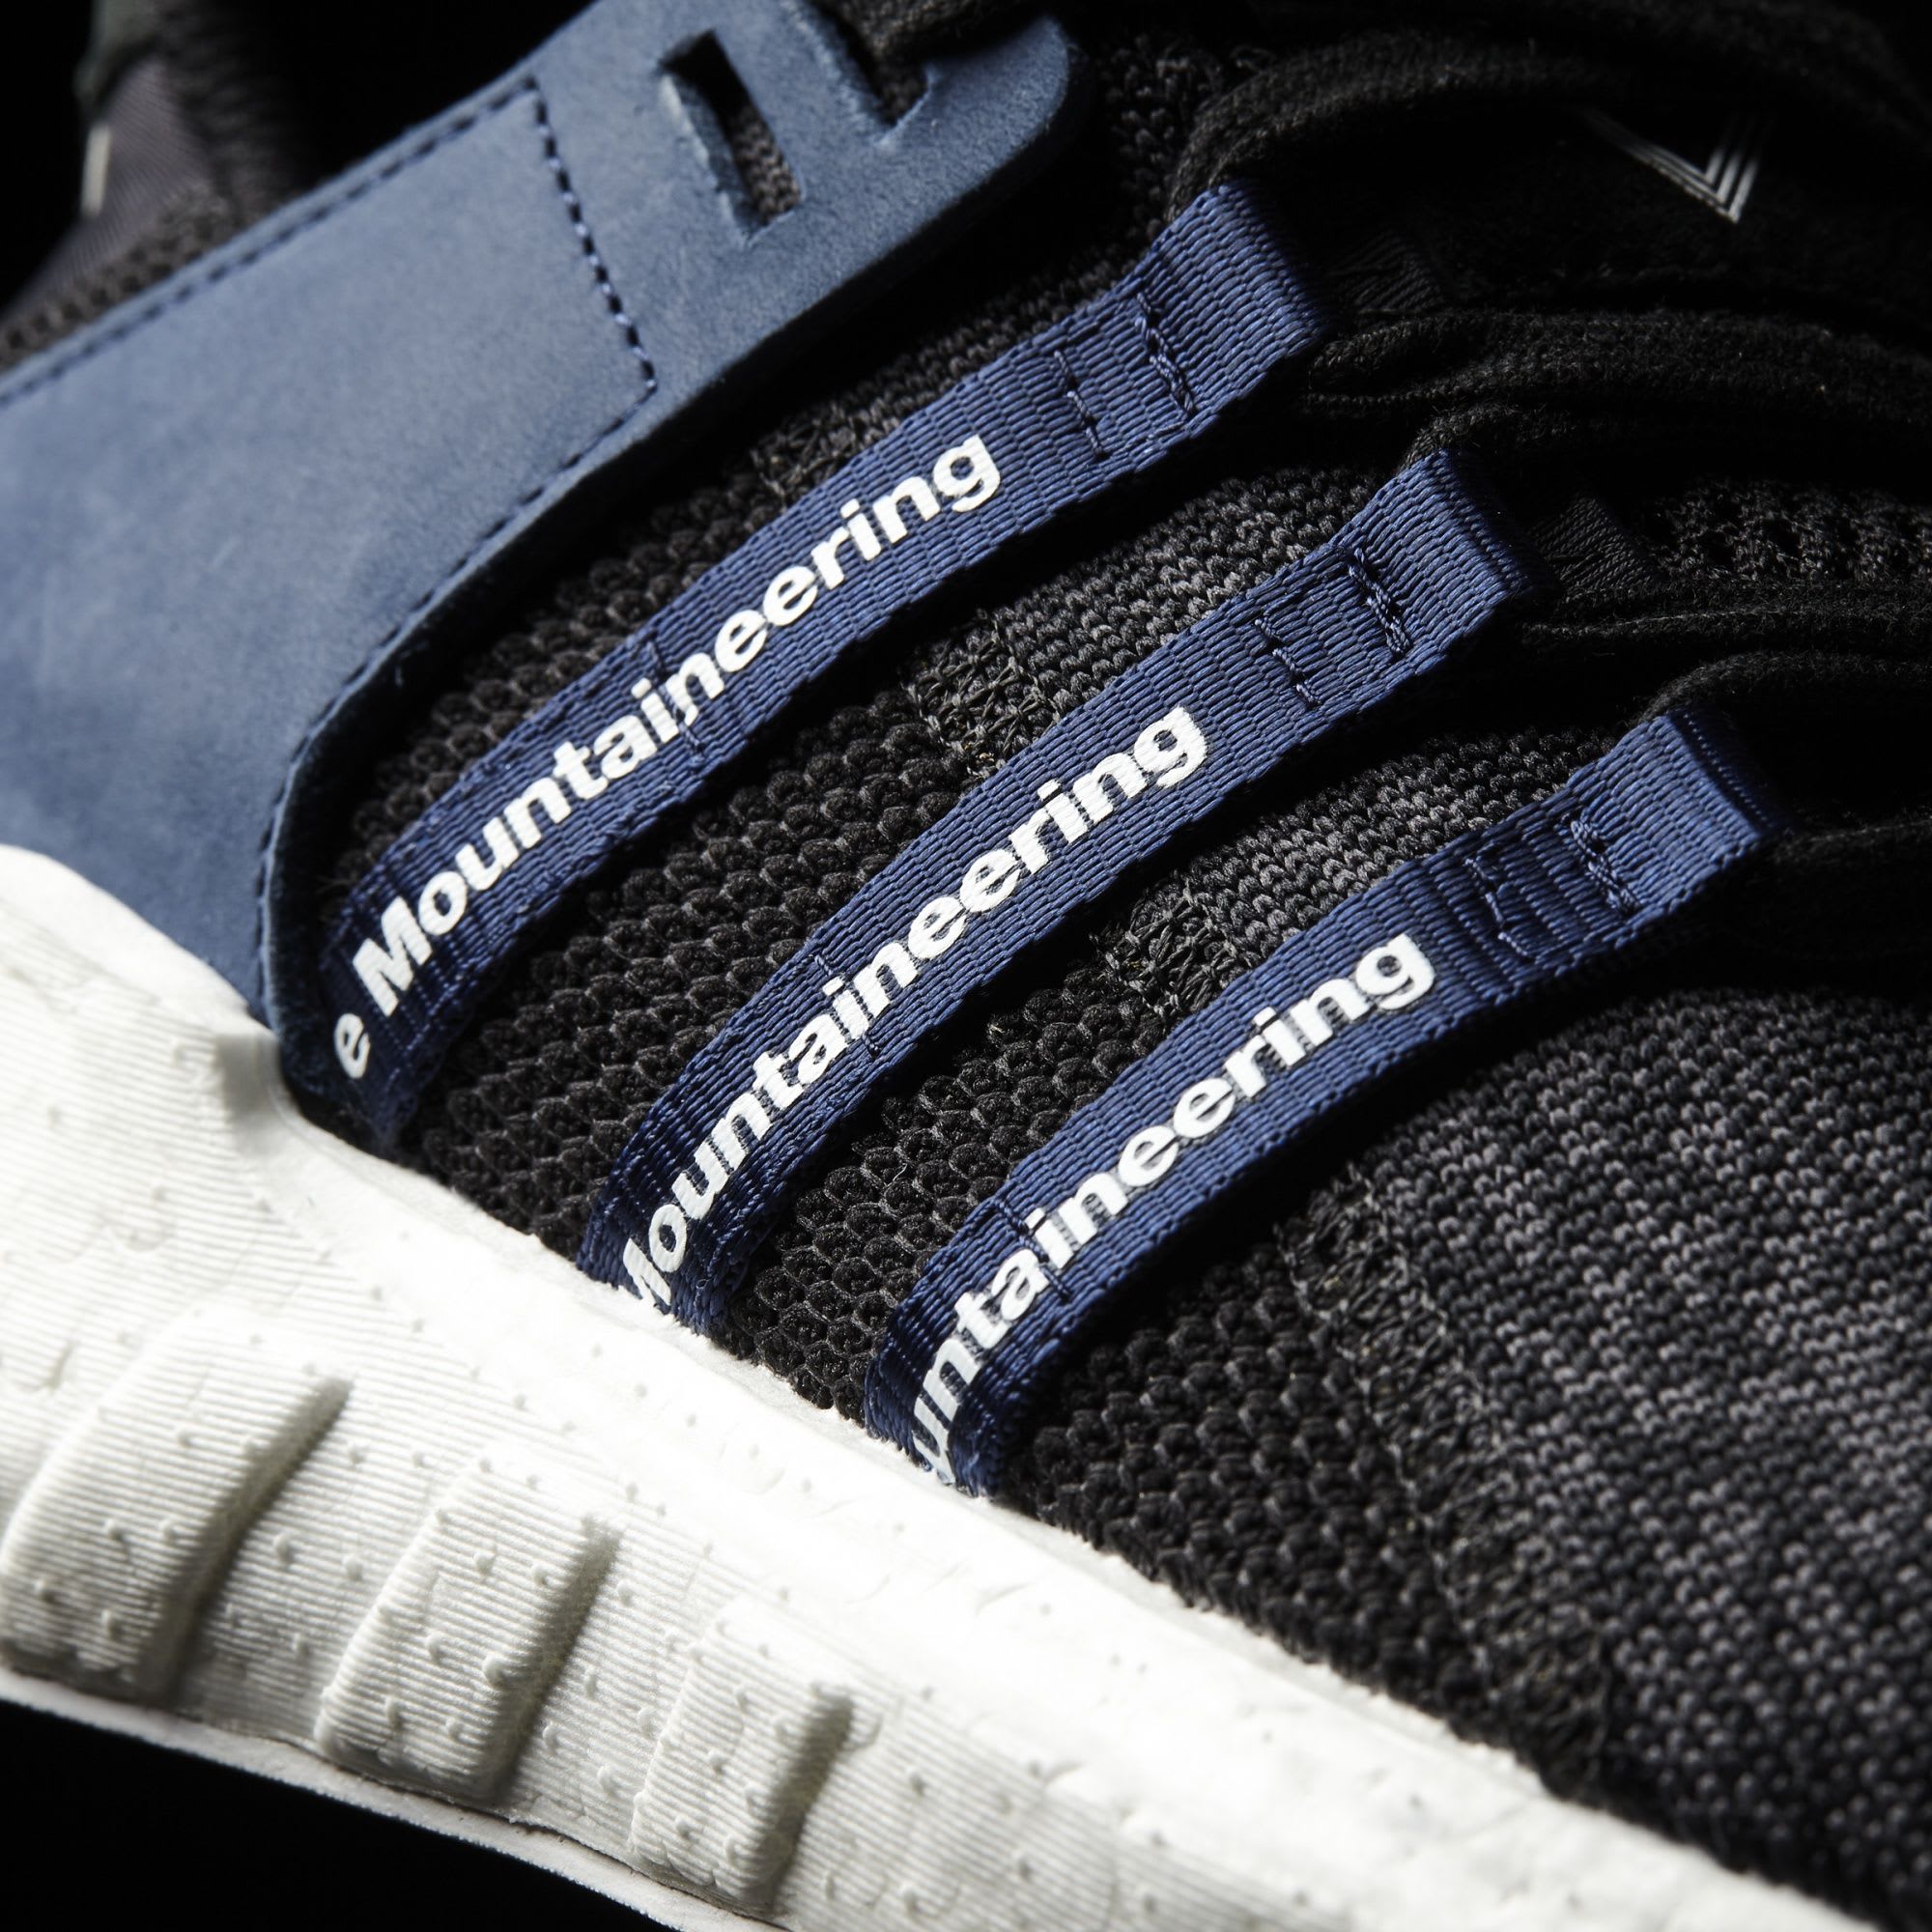 White Mountaineering x Adidas EQT Support 93-17 detail